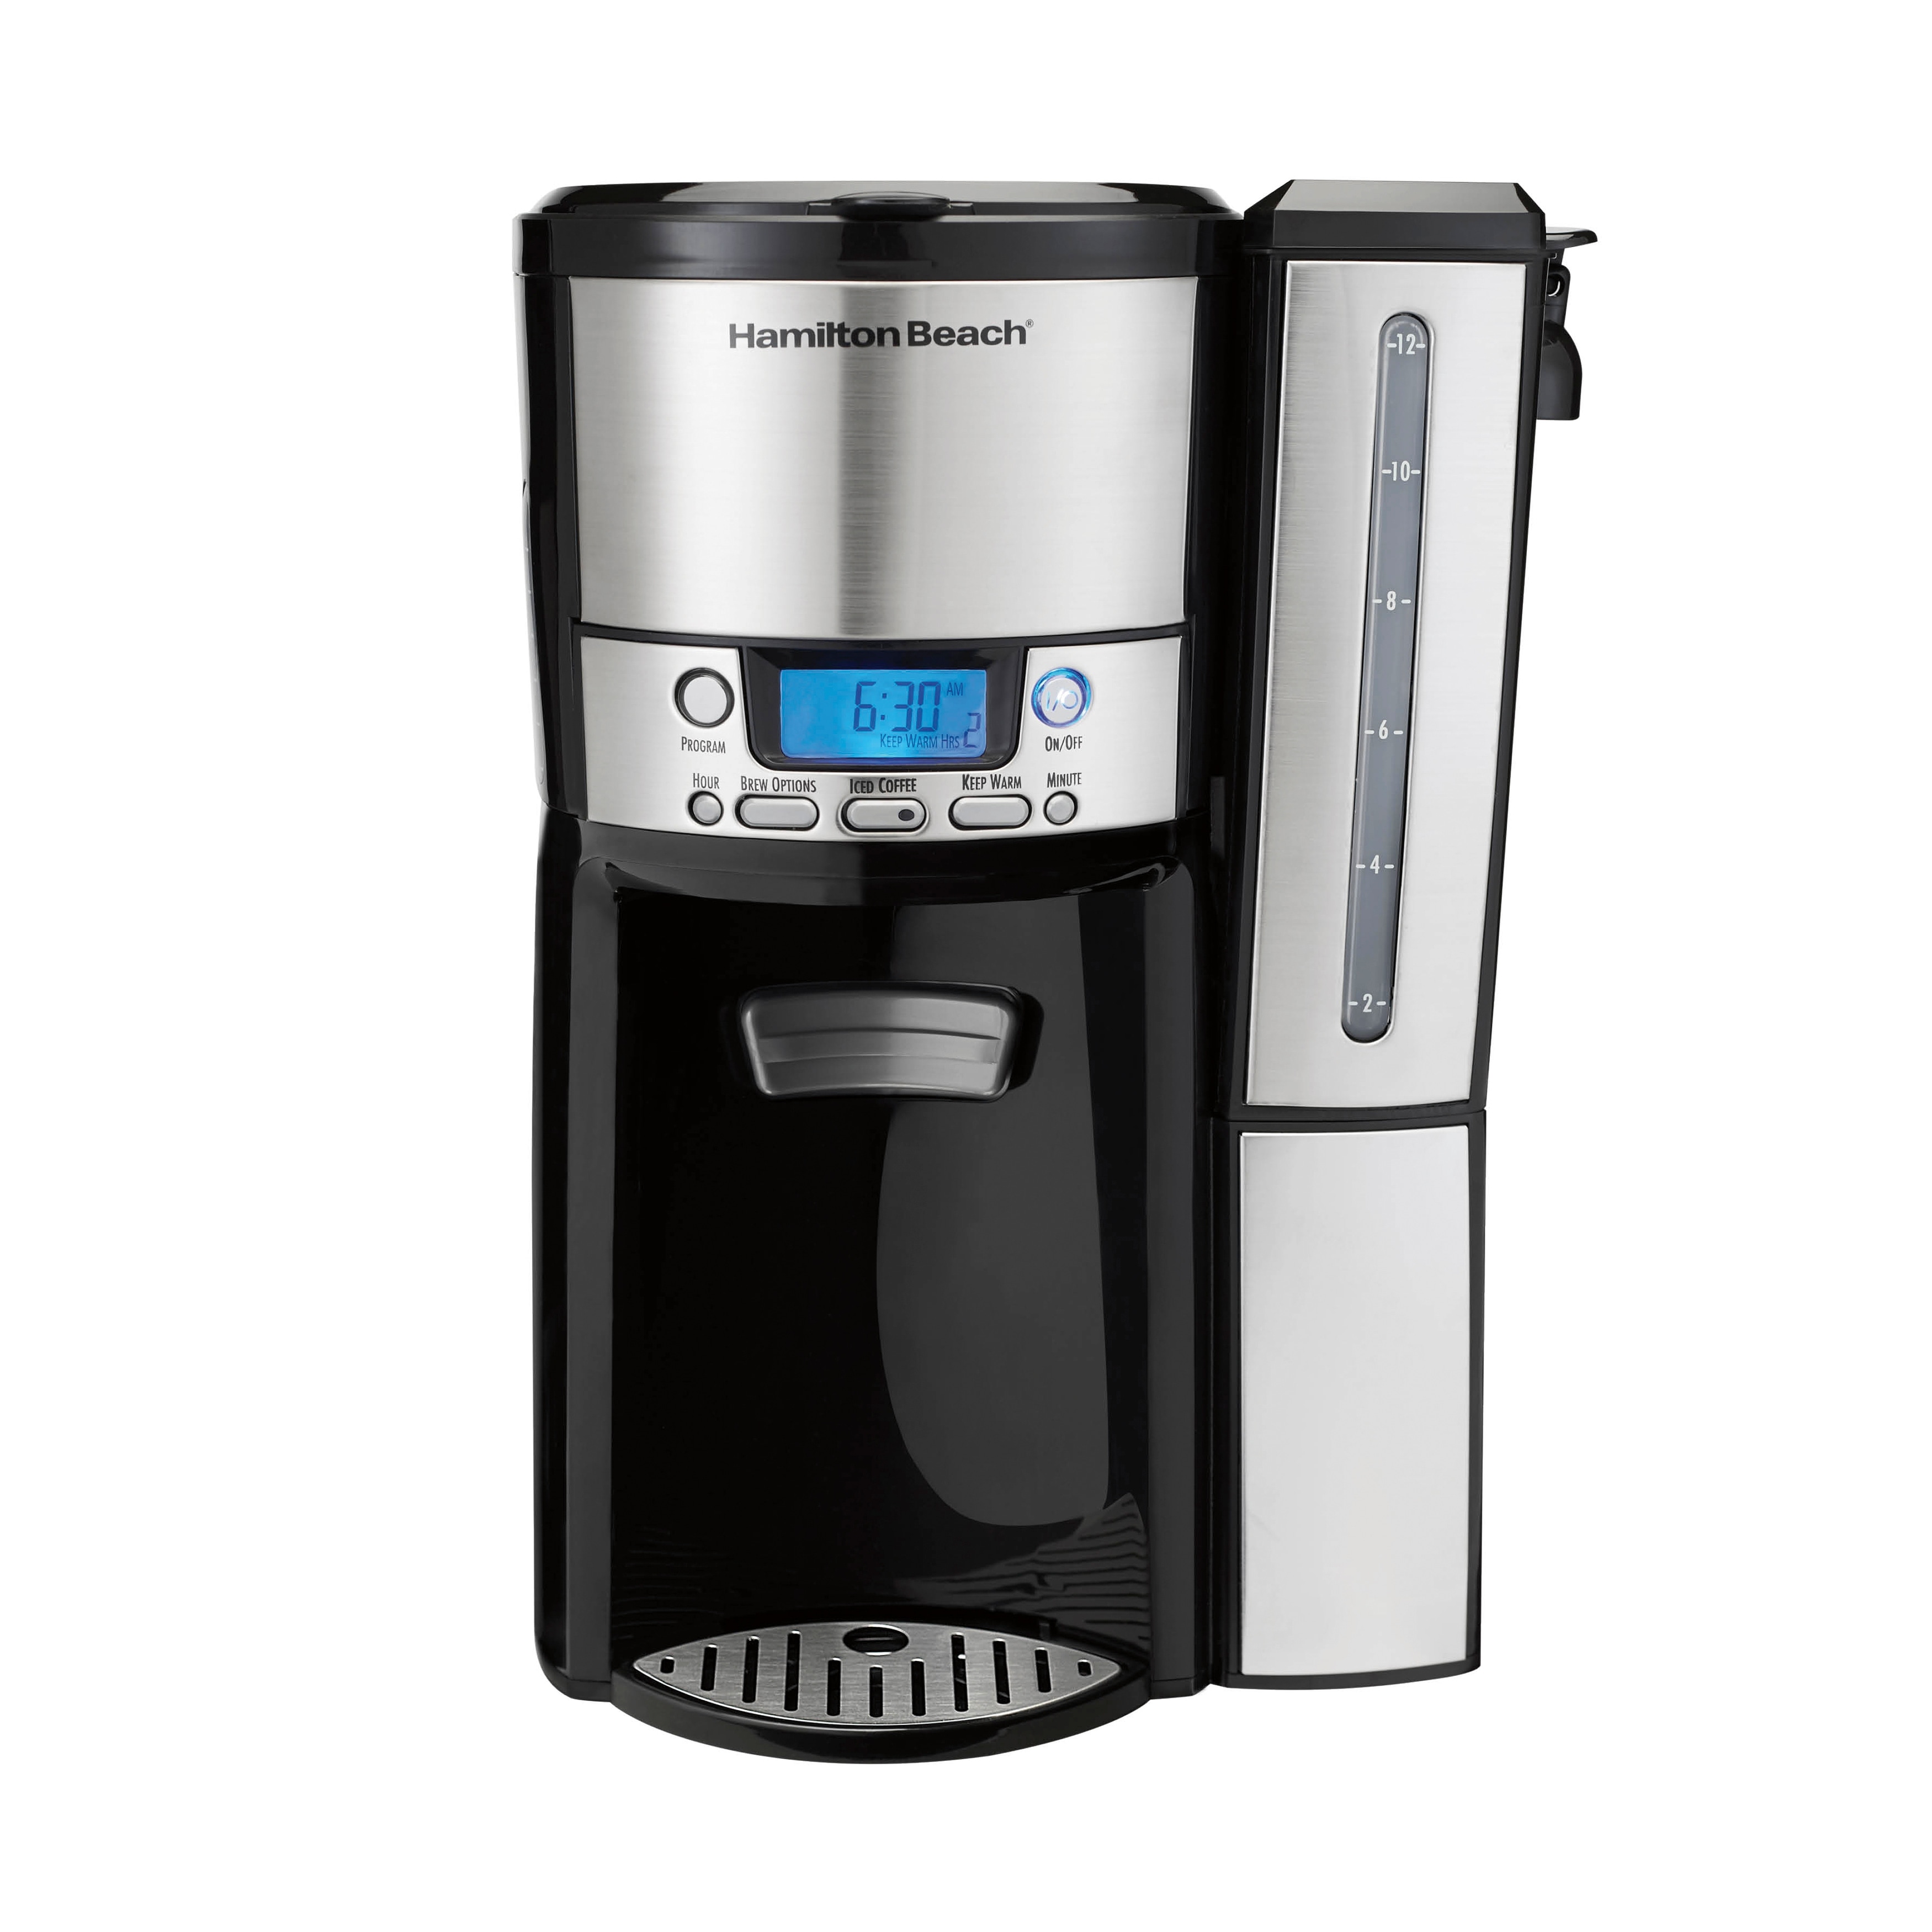 https://ak1.ostkcdn.com/images/products/is/images/direct/1184736ead14b3655ac4b16bd9ee9556a4fee50d/Hamilton-Beach-BrewStation-12-Cup-Programable-Dispensing-Coffee-Maker.jpg